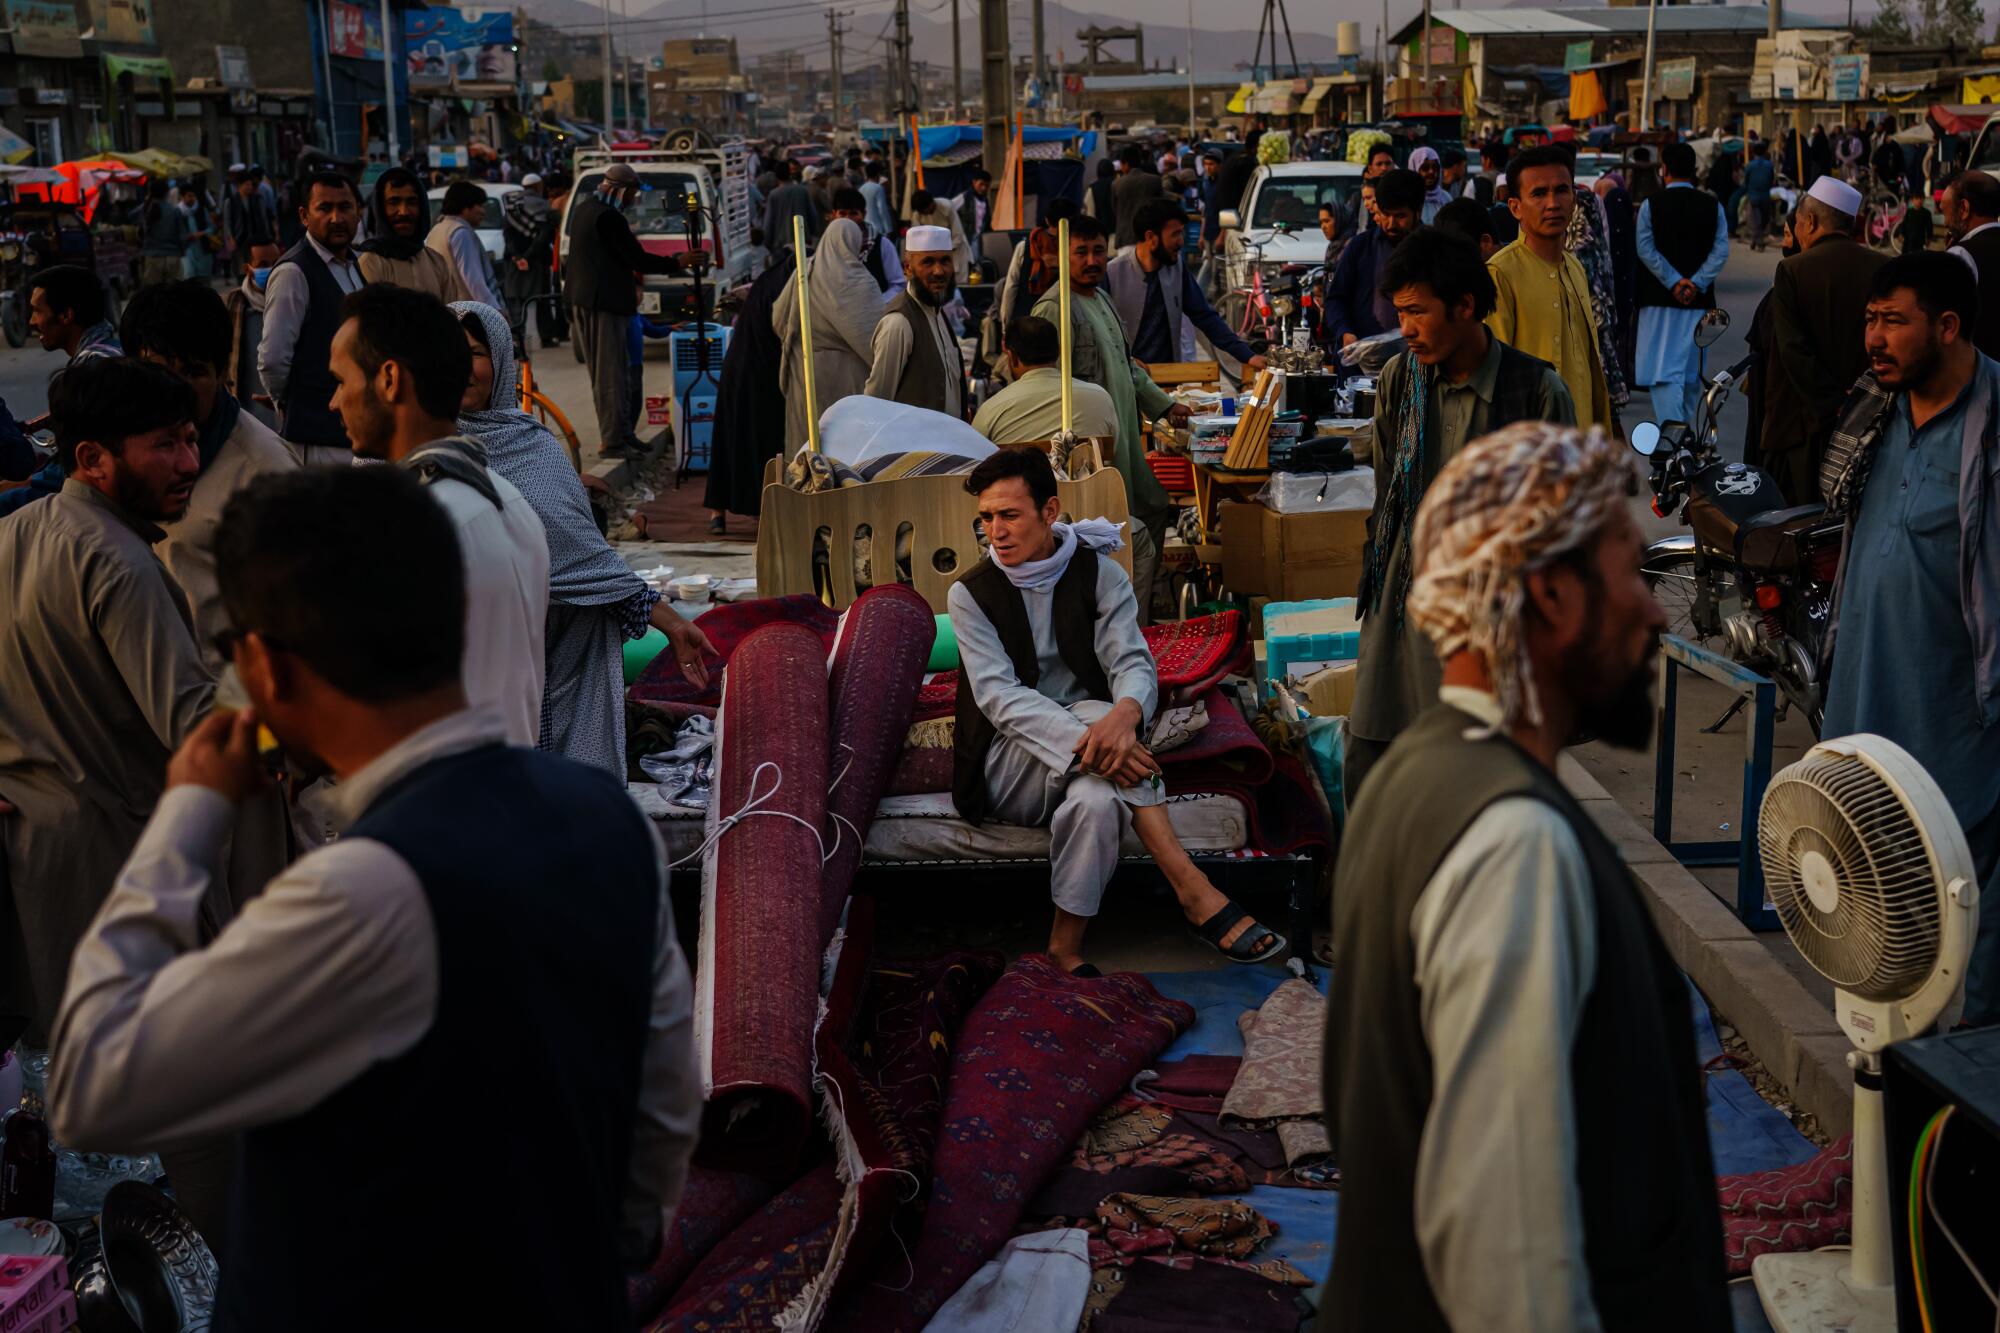 A person sits on a bed among people walking in a street bazaar.